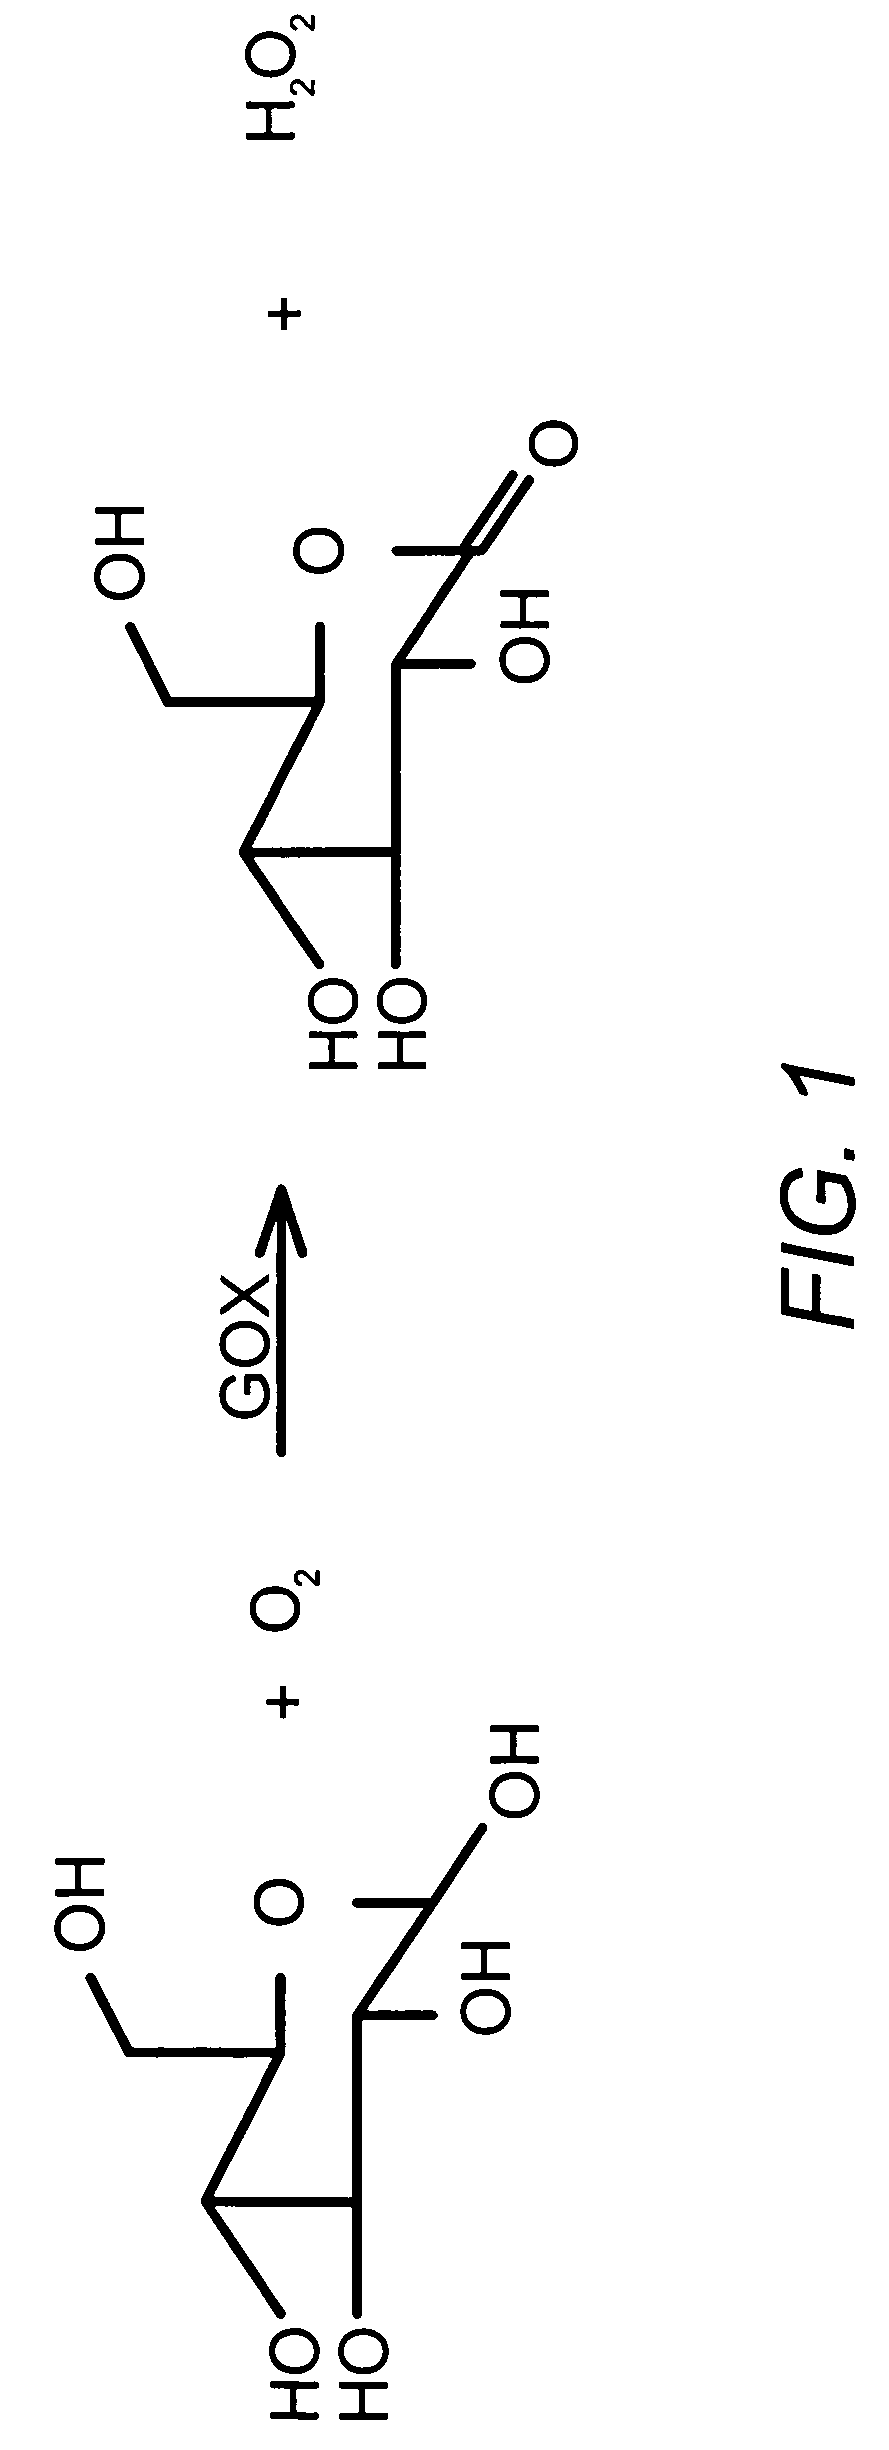 Polypeptide formulations and methods for making, using and characterizing them